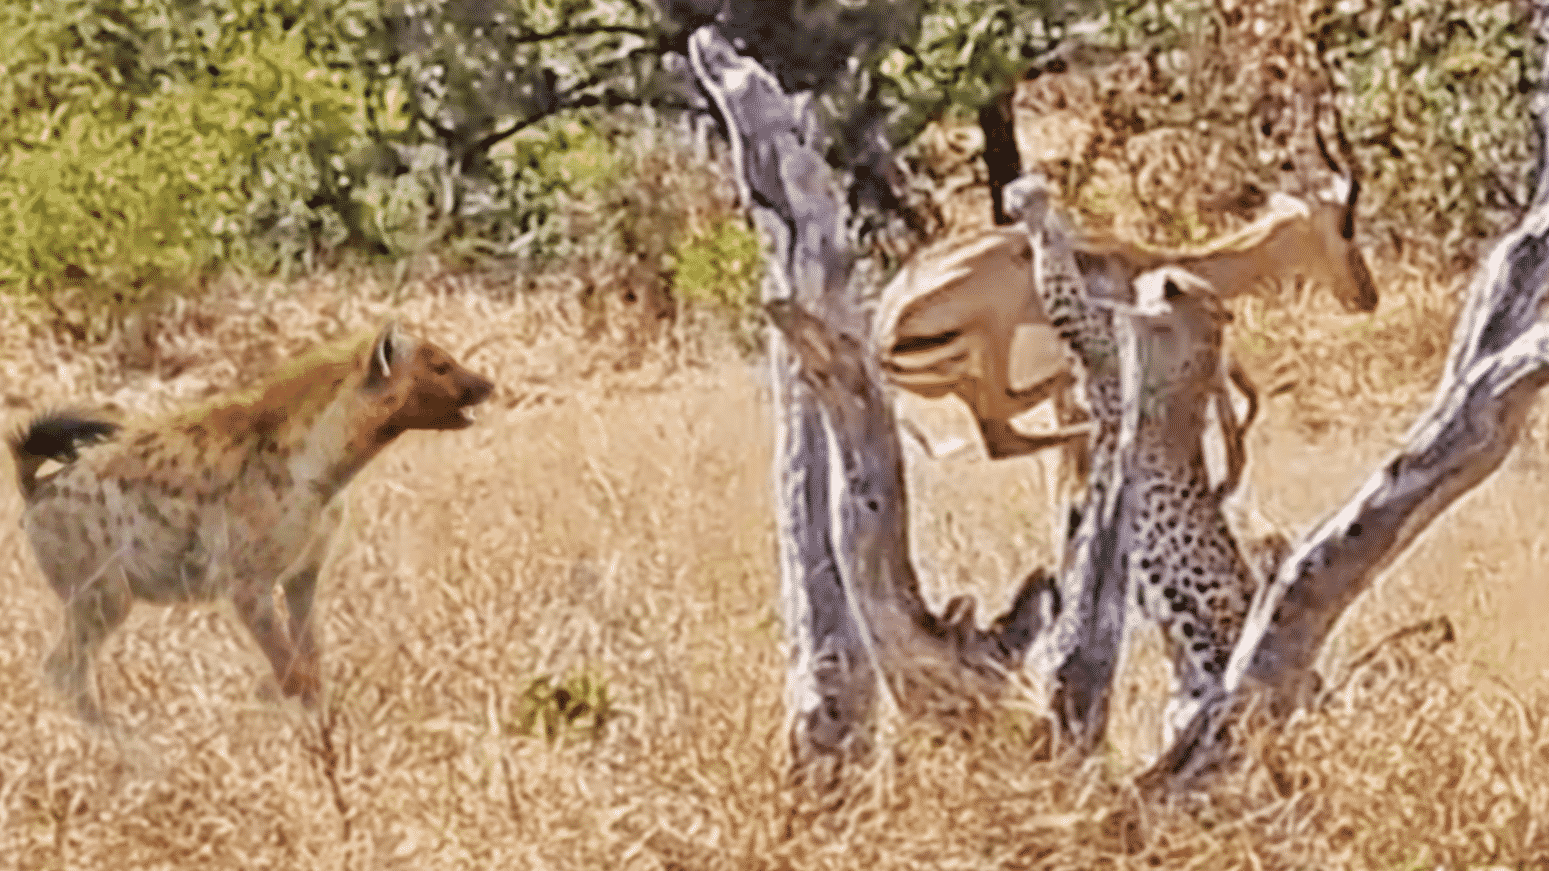 Leopard Catches Impala, Loses it to Hyena, then Fights Back